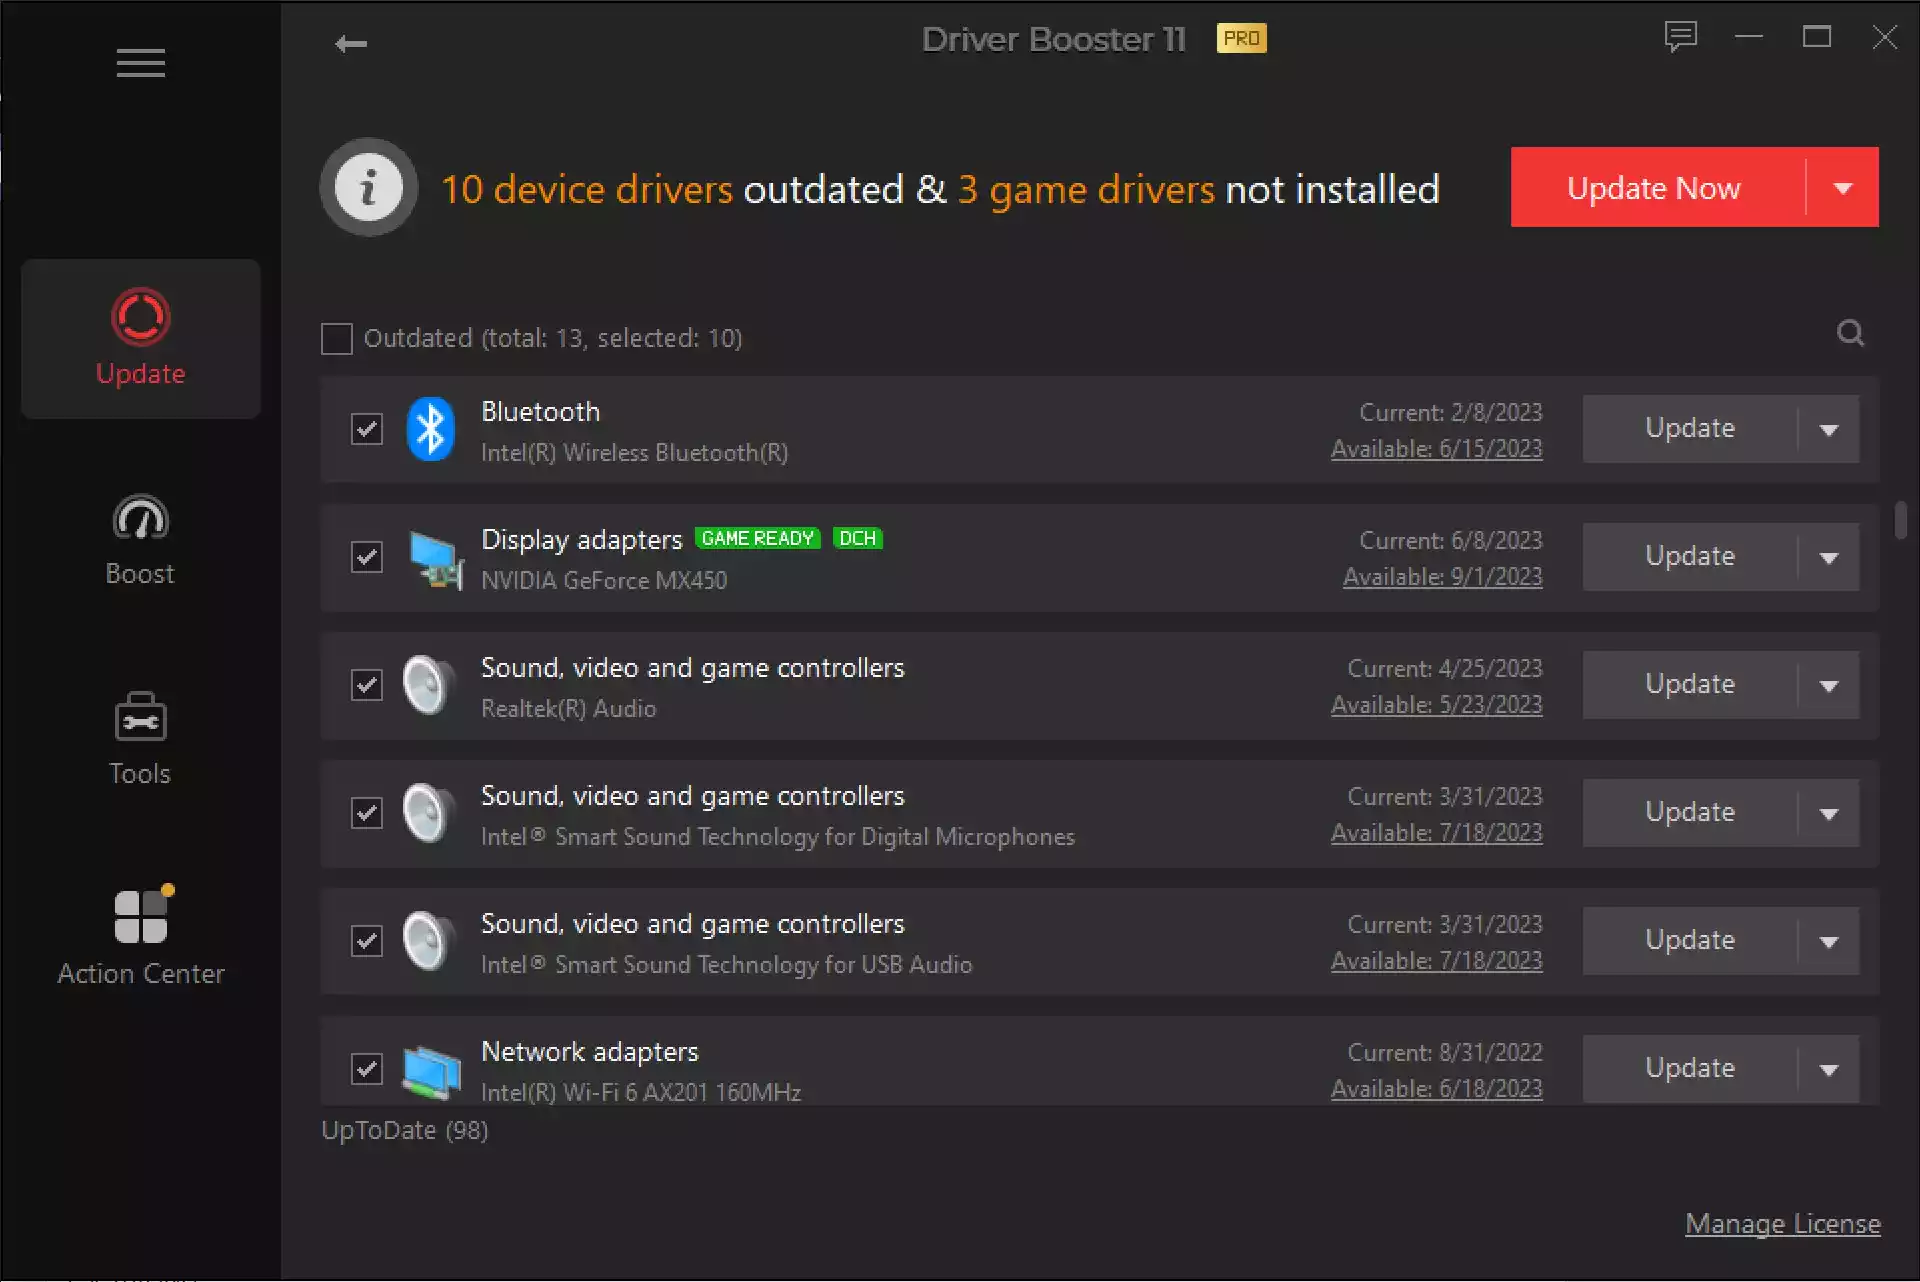 IObit Driver Booster Pro 11 full version download